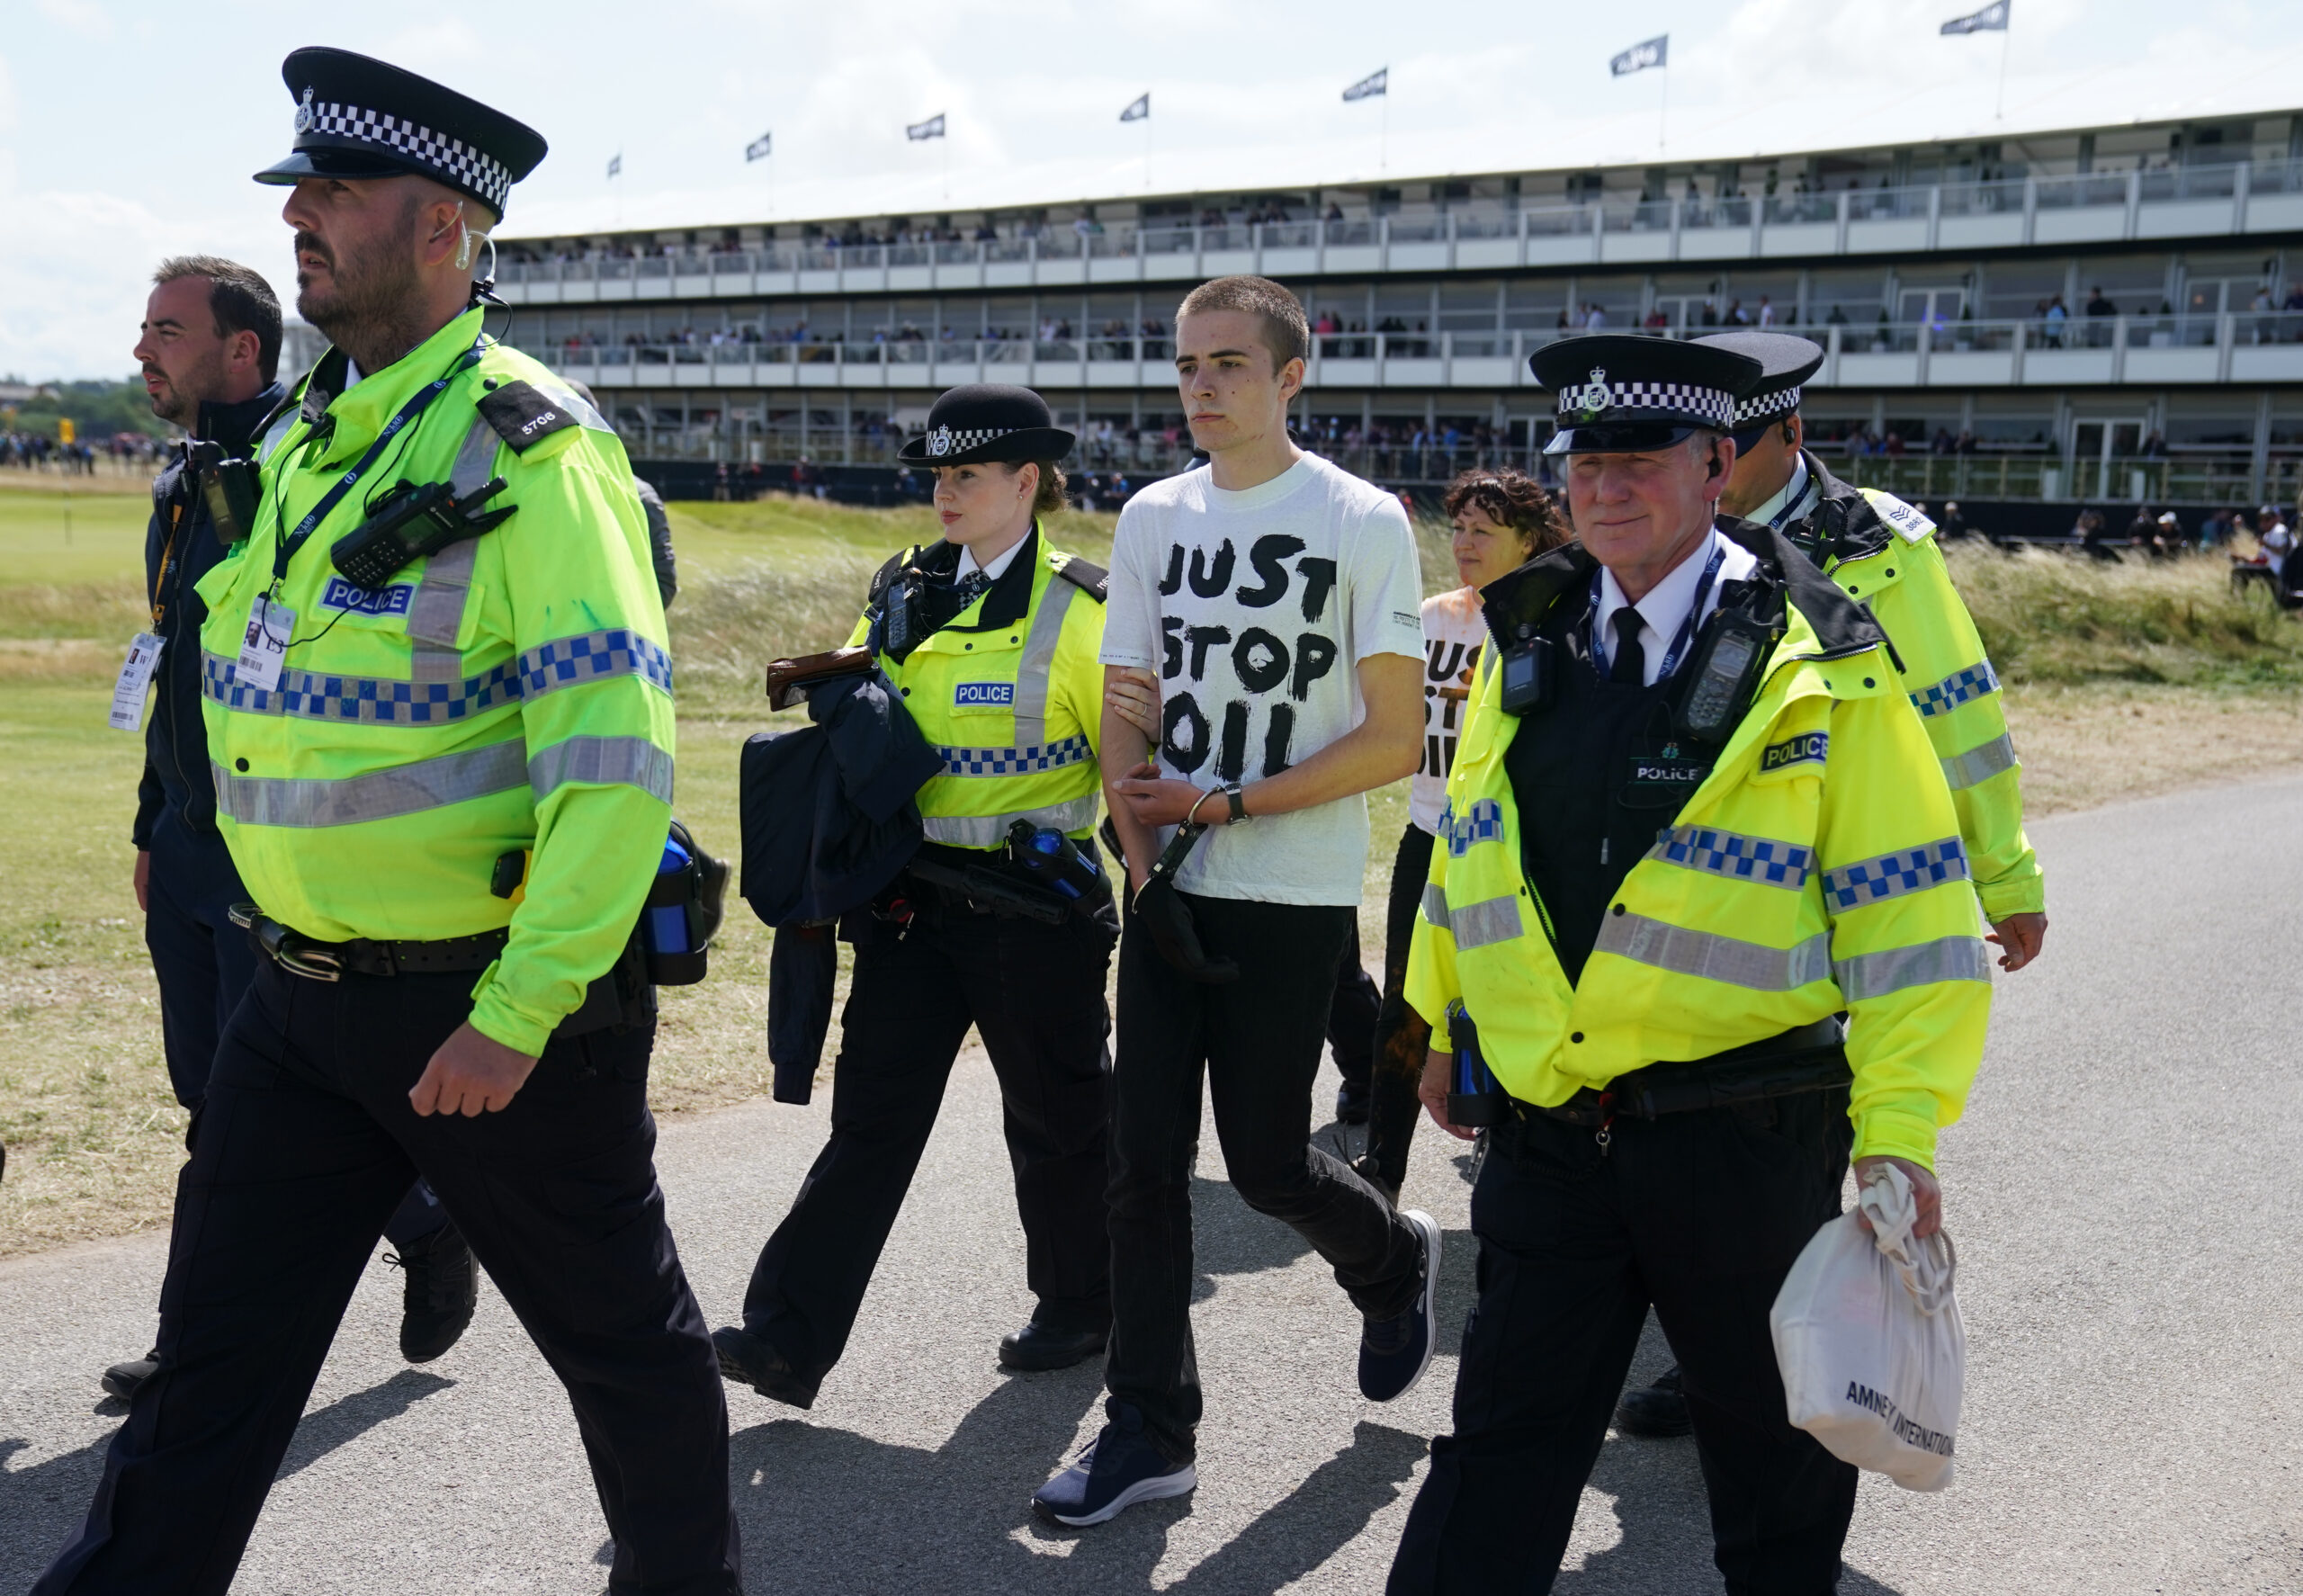 A Just Stop Oil protester is arrested by police